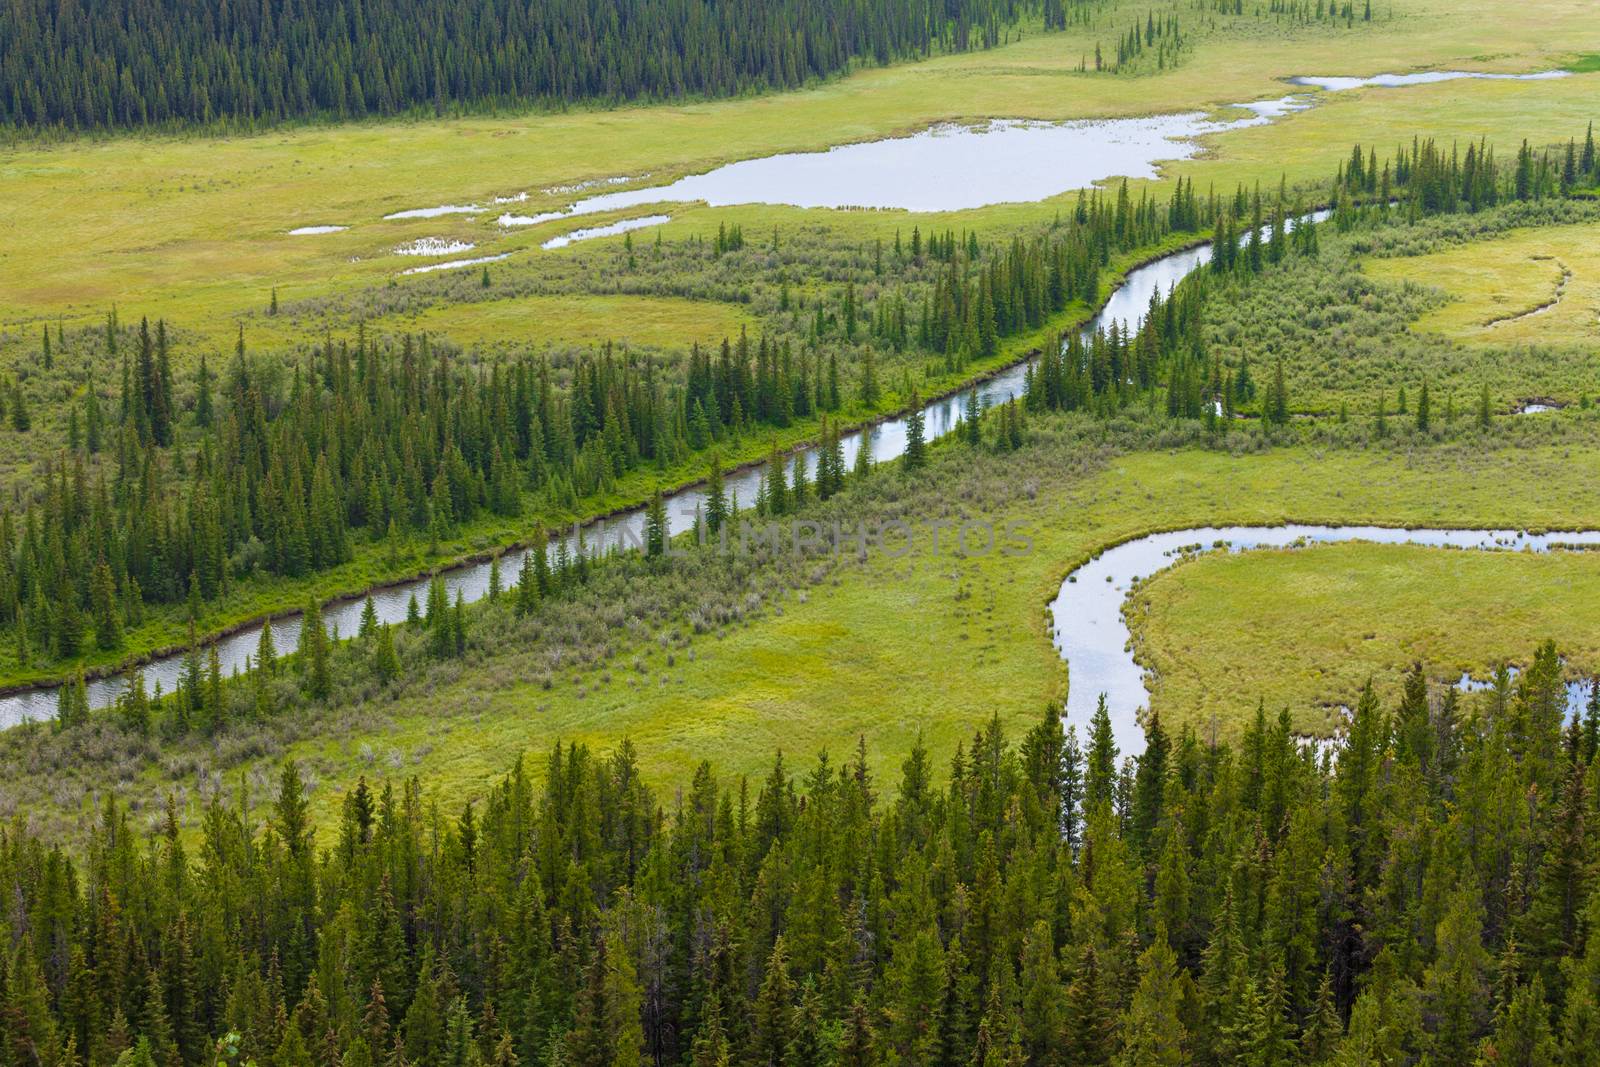 Aerial view of small river flowing through green marshy riparian wetland landscape in Alberta foothills, Canada